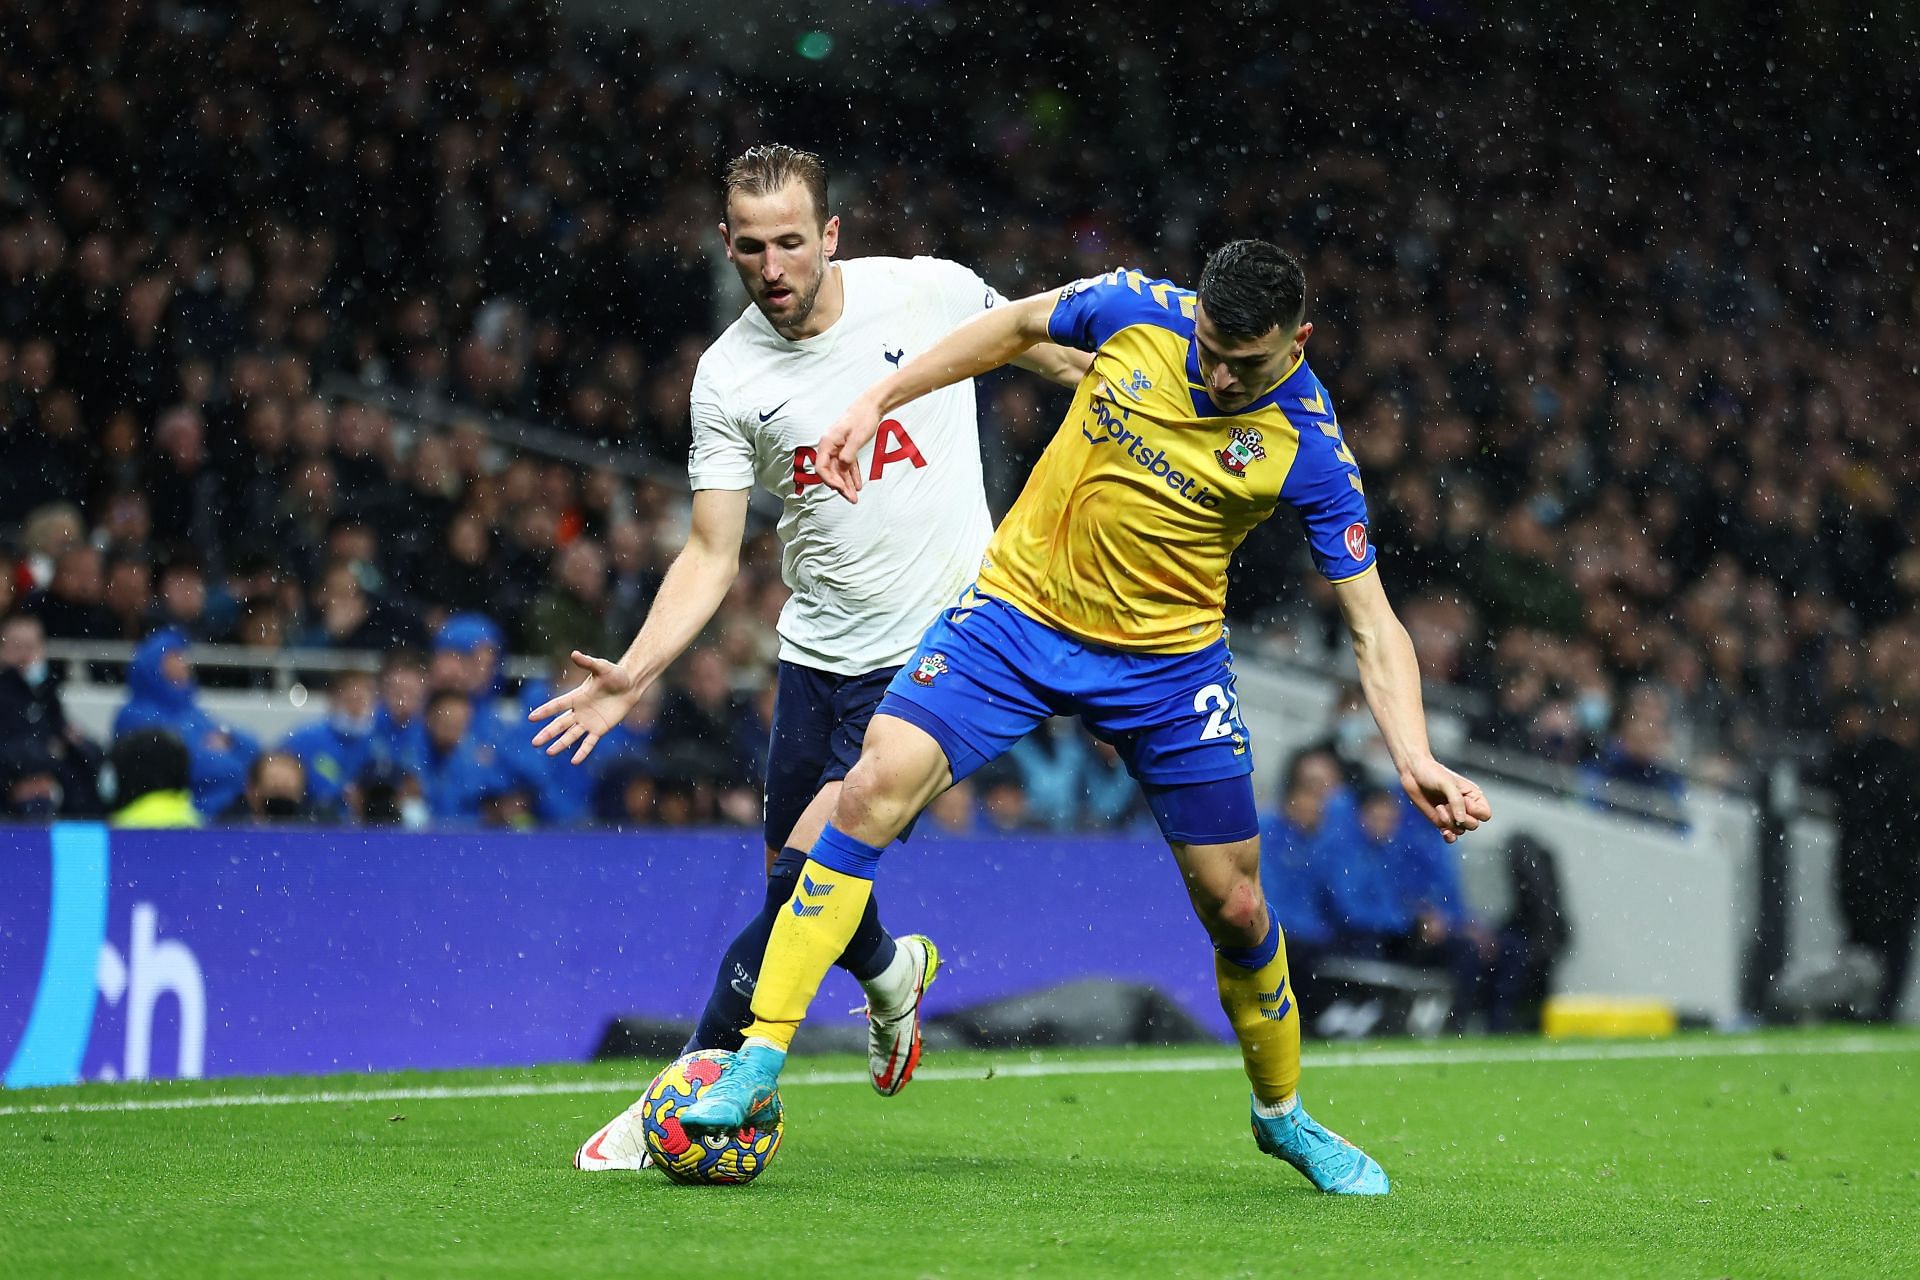 Tottenham and Southampton will square off in their Premier League opener on Saturday.